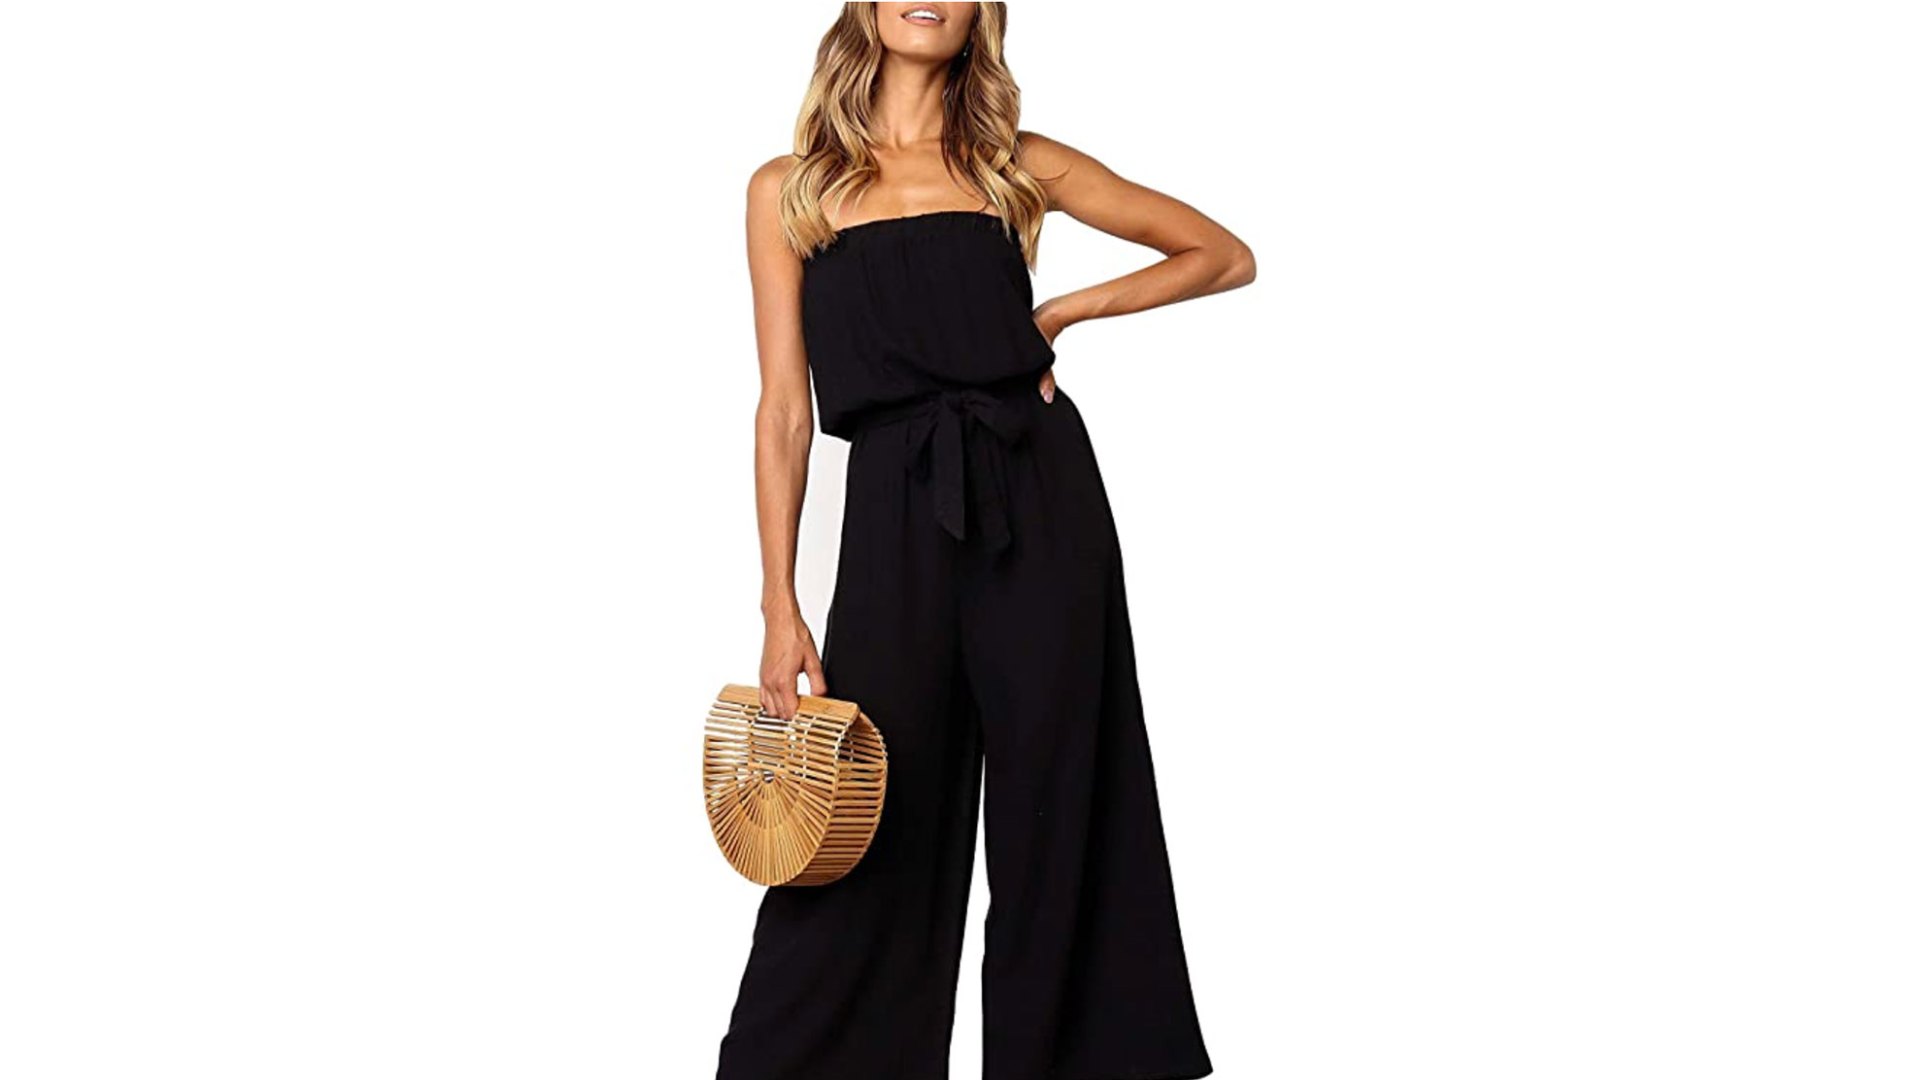 ZESICA Strapless Jumpsuit Romper Works For Day and Night | Us Weekly